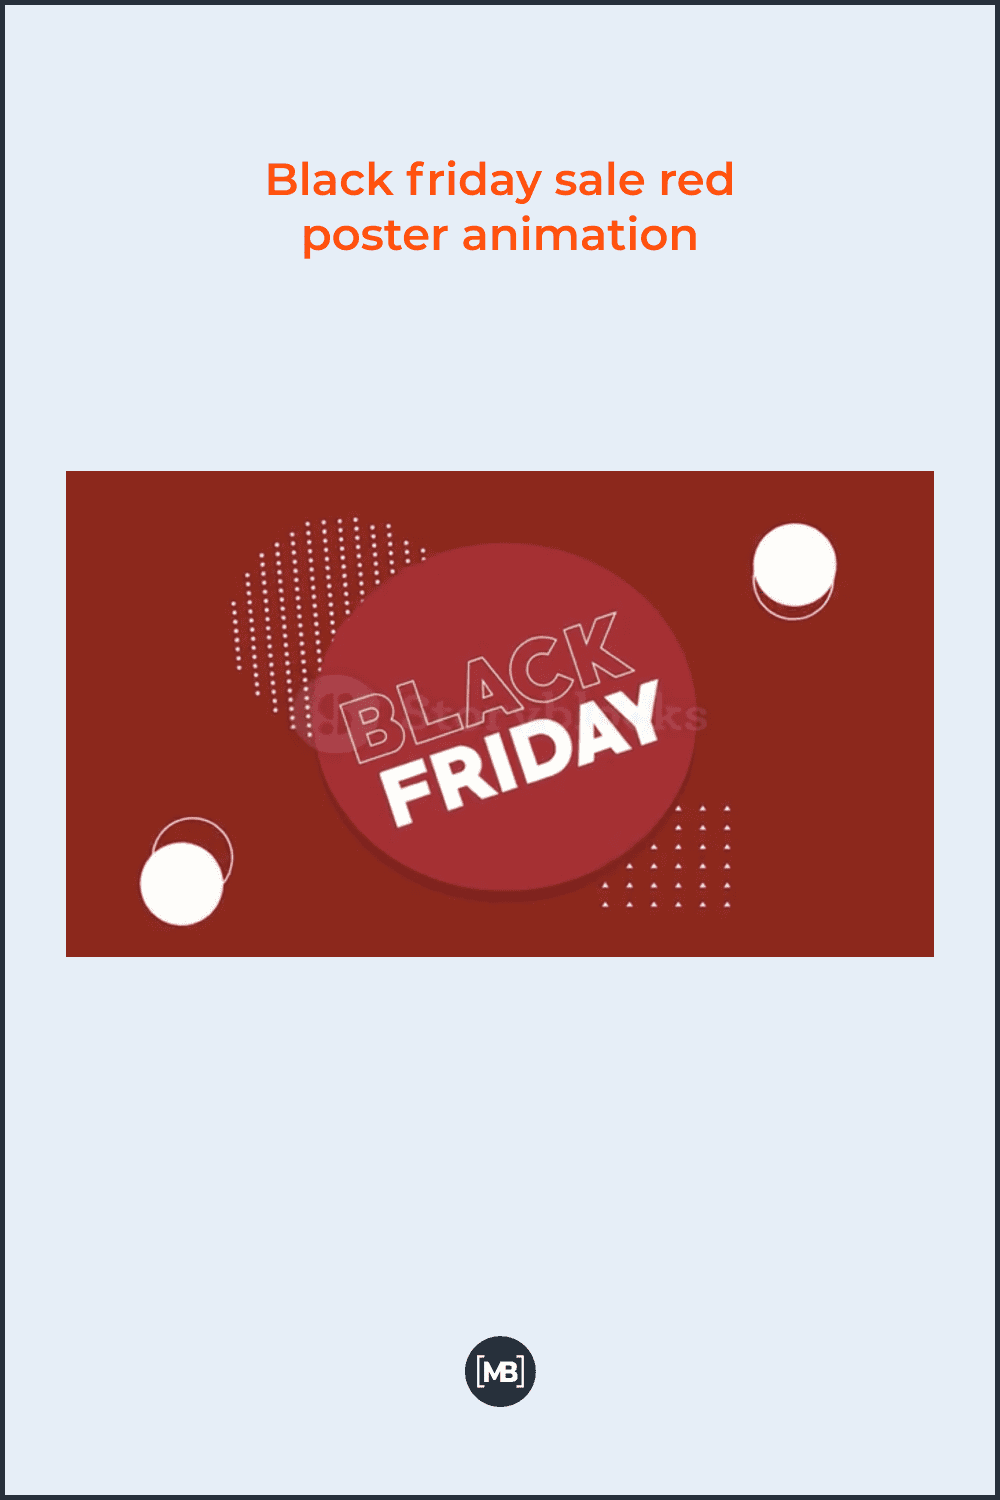 Black Friday sale red poster animation.